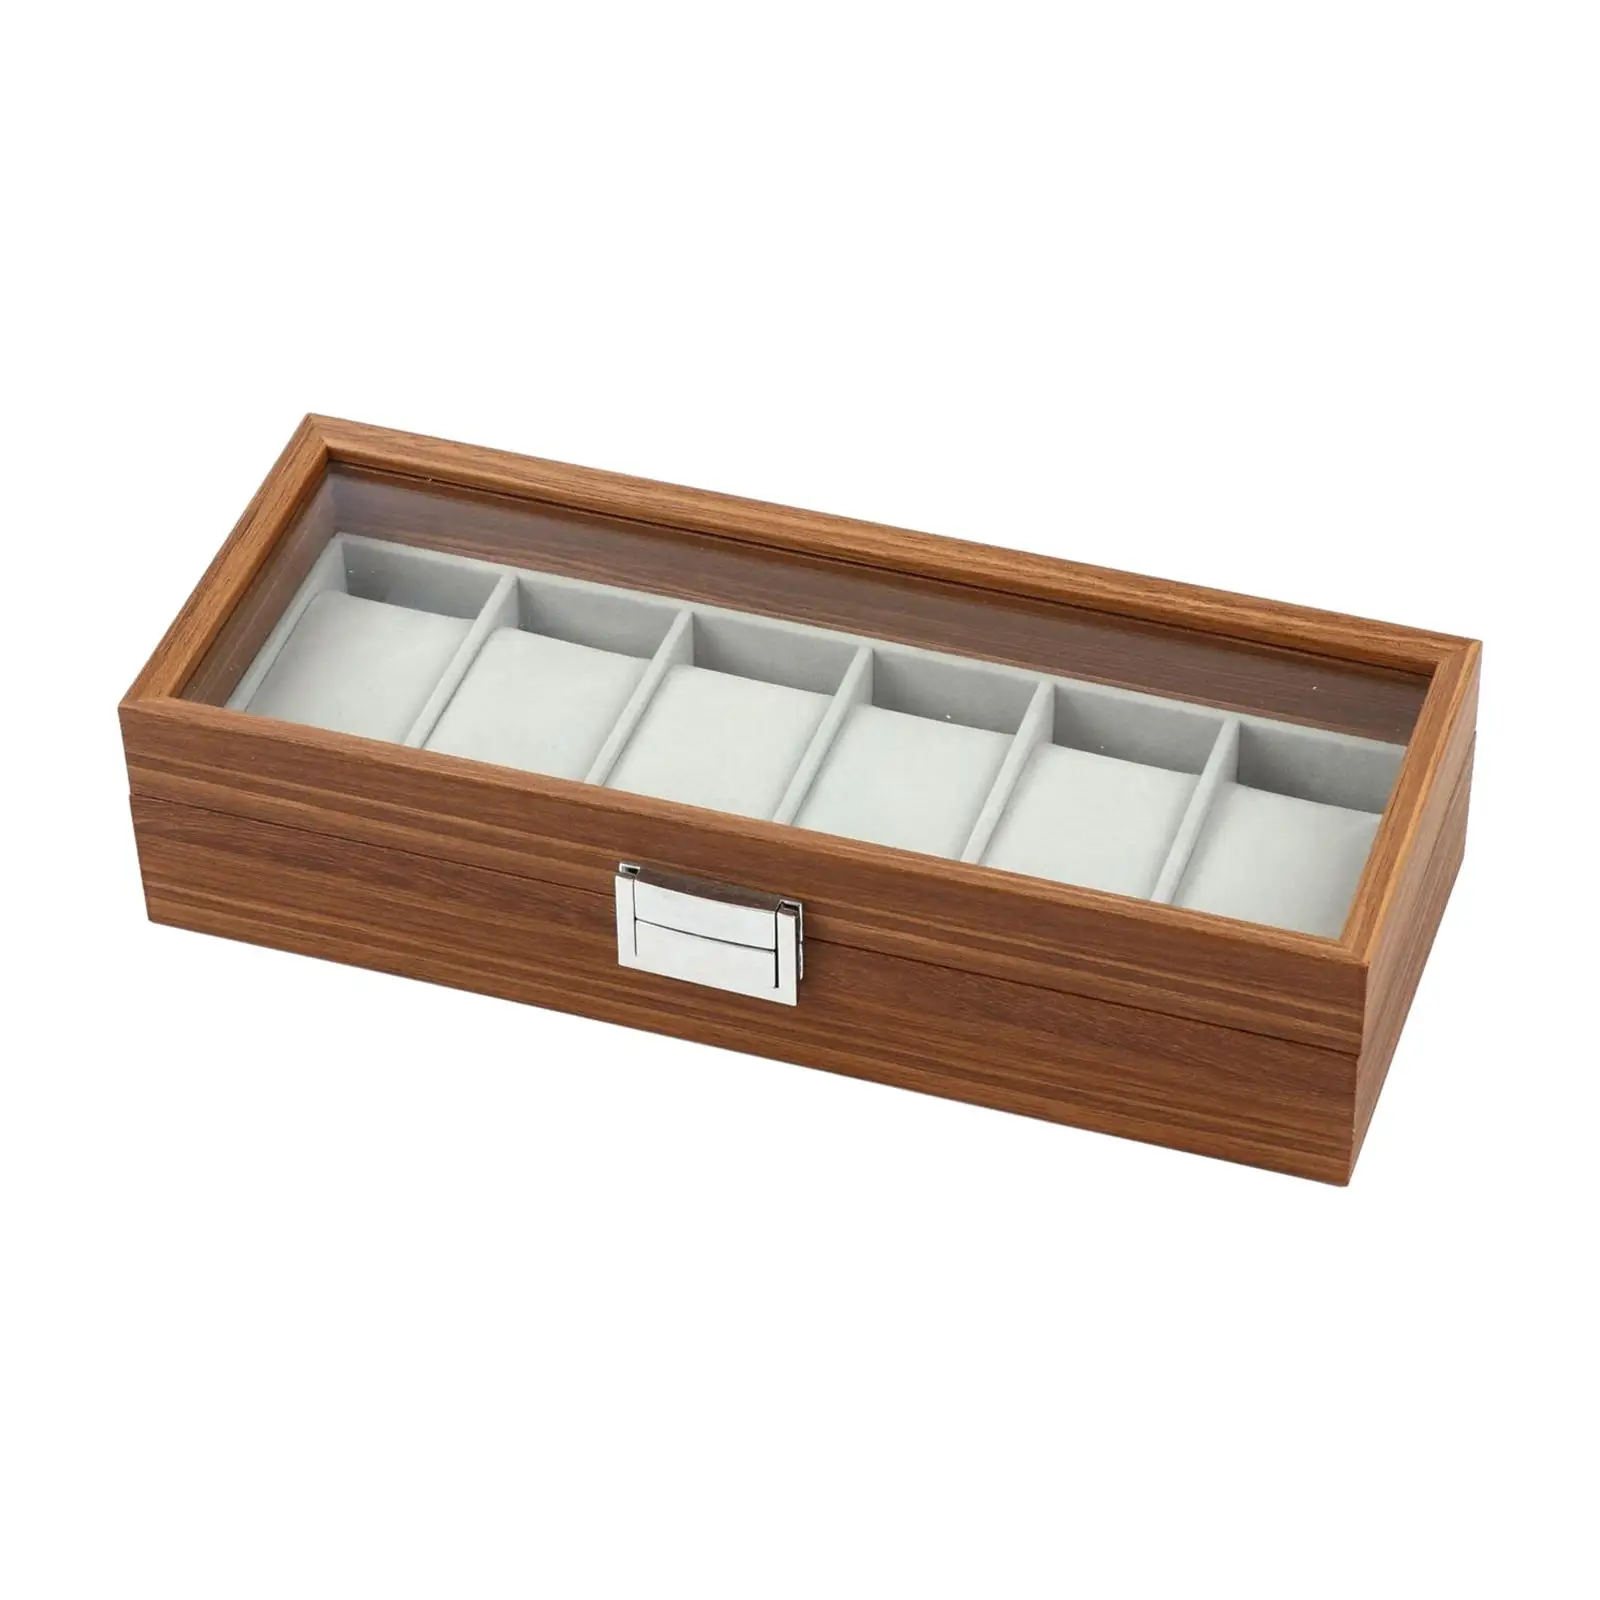 Watch Storage Box 6 Slot Elegant Container Wood Watch Box for Watches Necklace Bracelet Earrings Men and Women Home Decoration